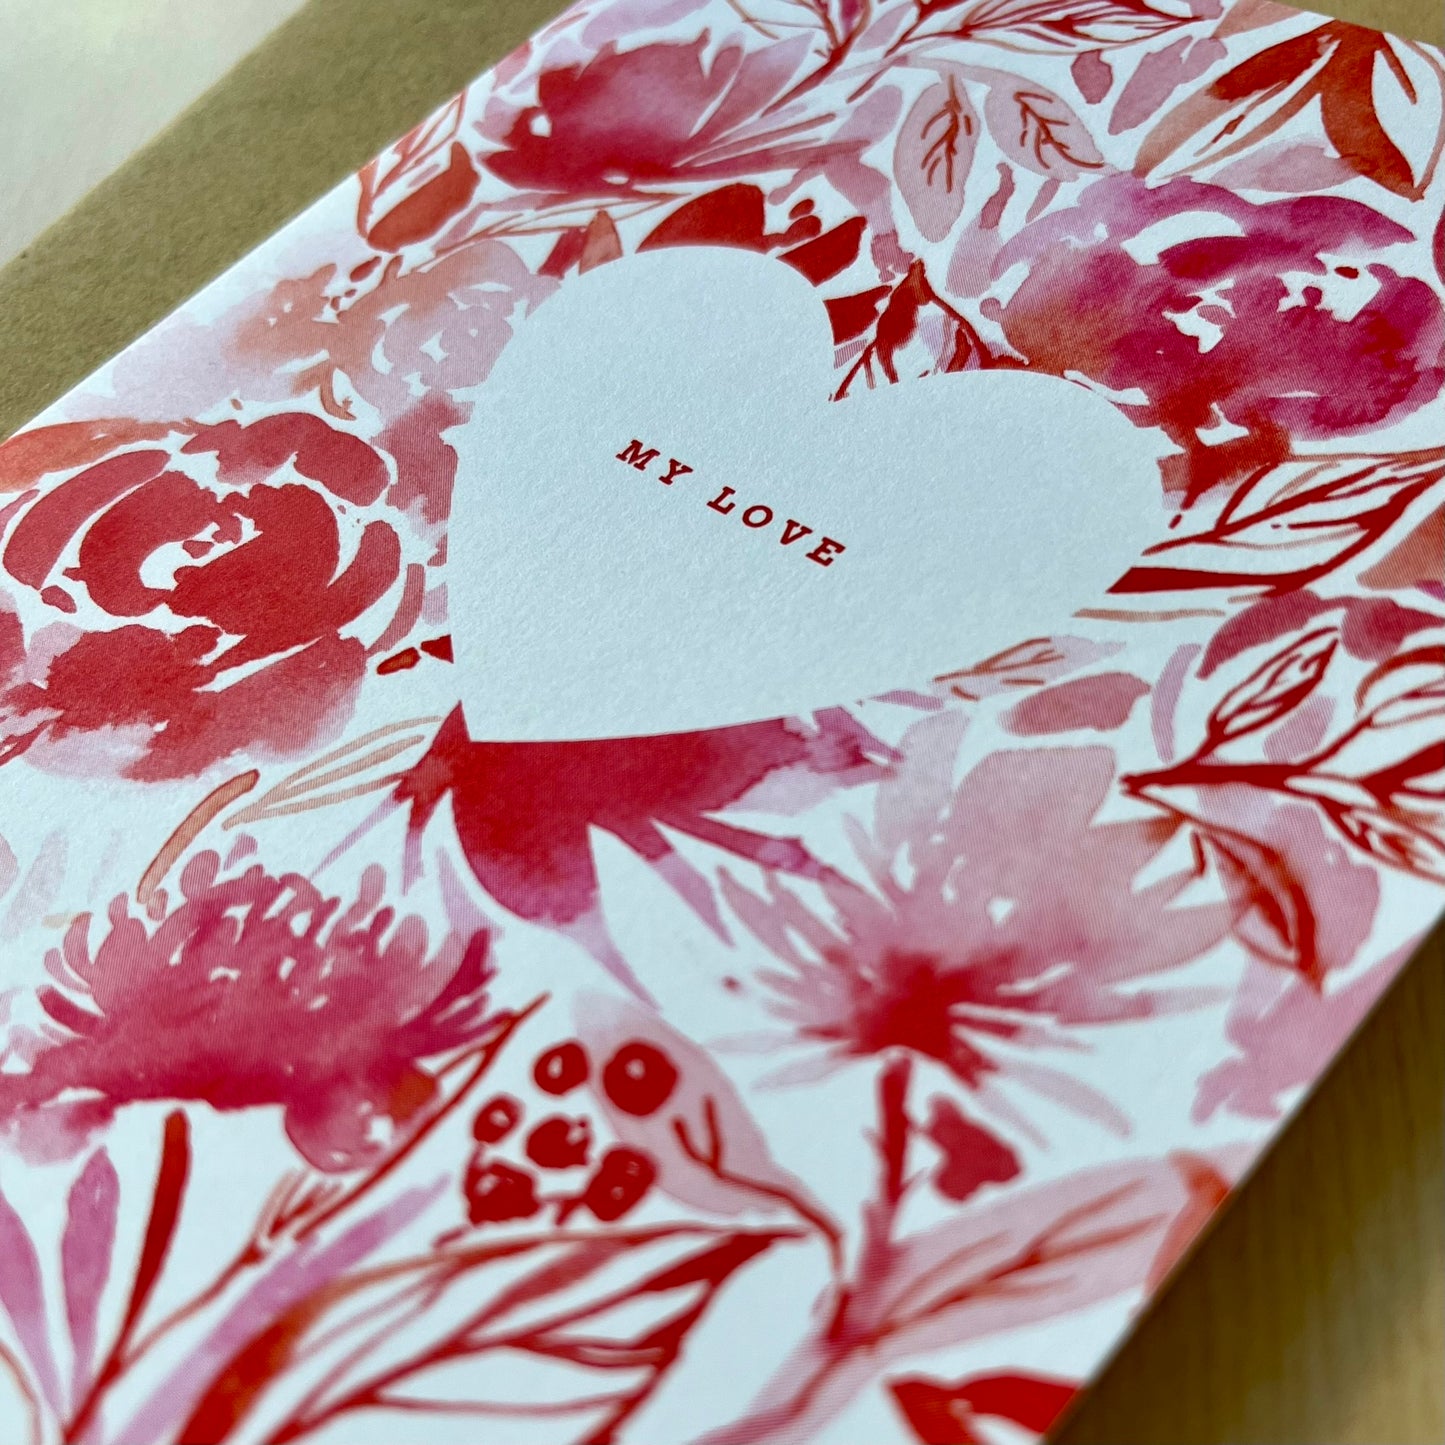 Card - My Love (Pink Floral)